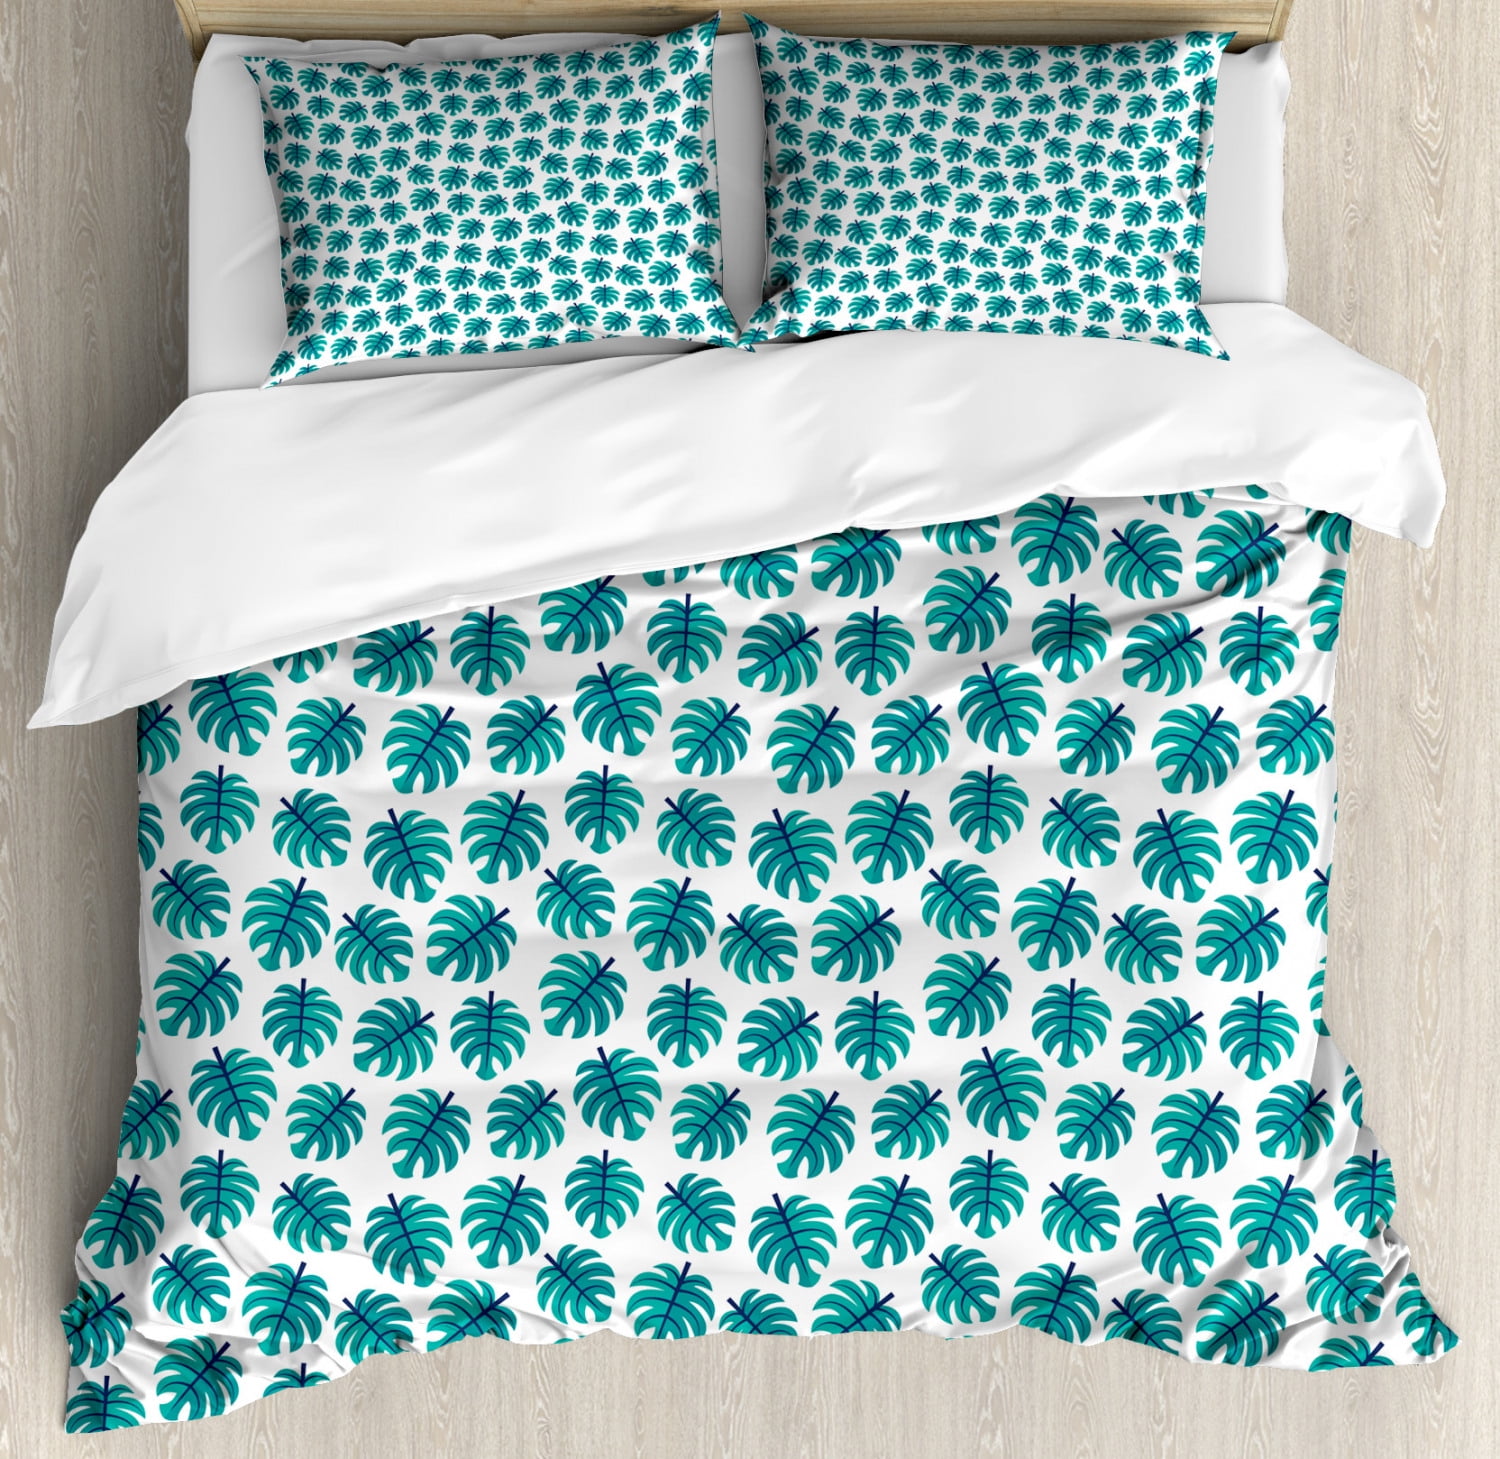 Navy And Teal King Size Duvet Cover Set Tropical Monstera Leaf